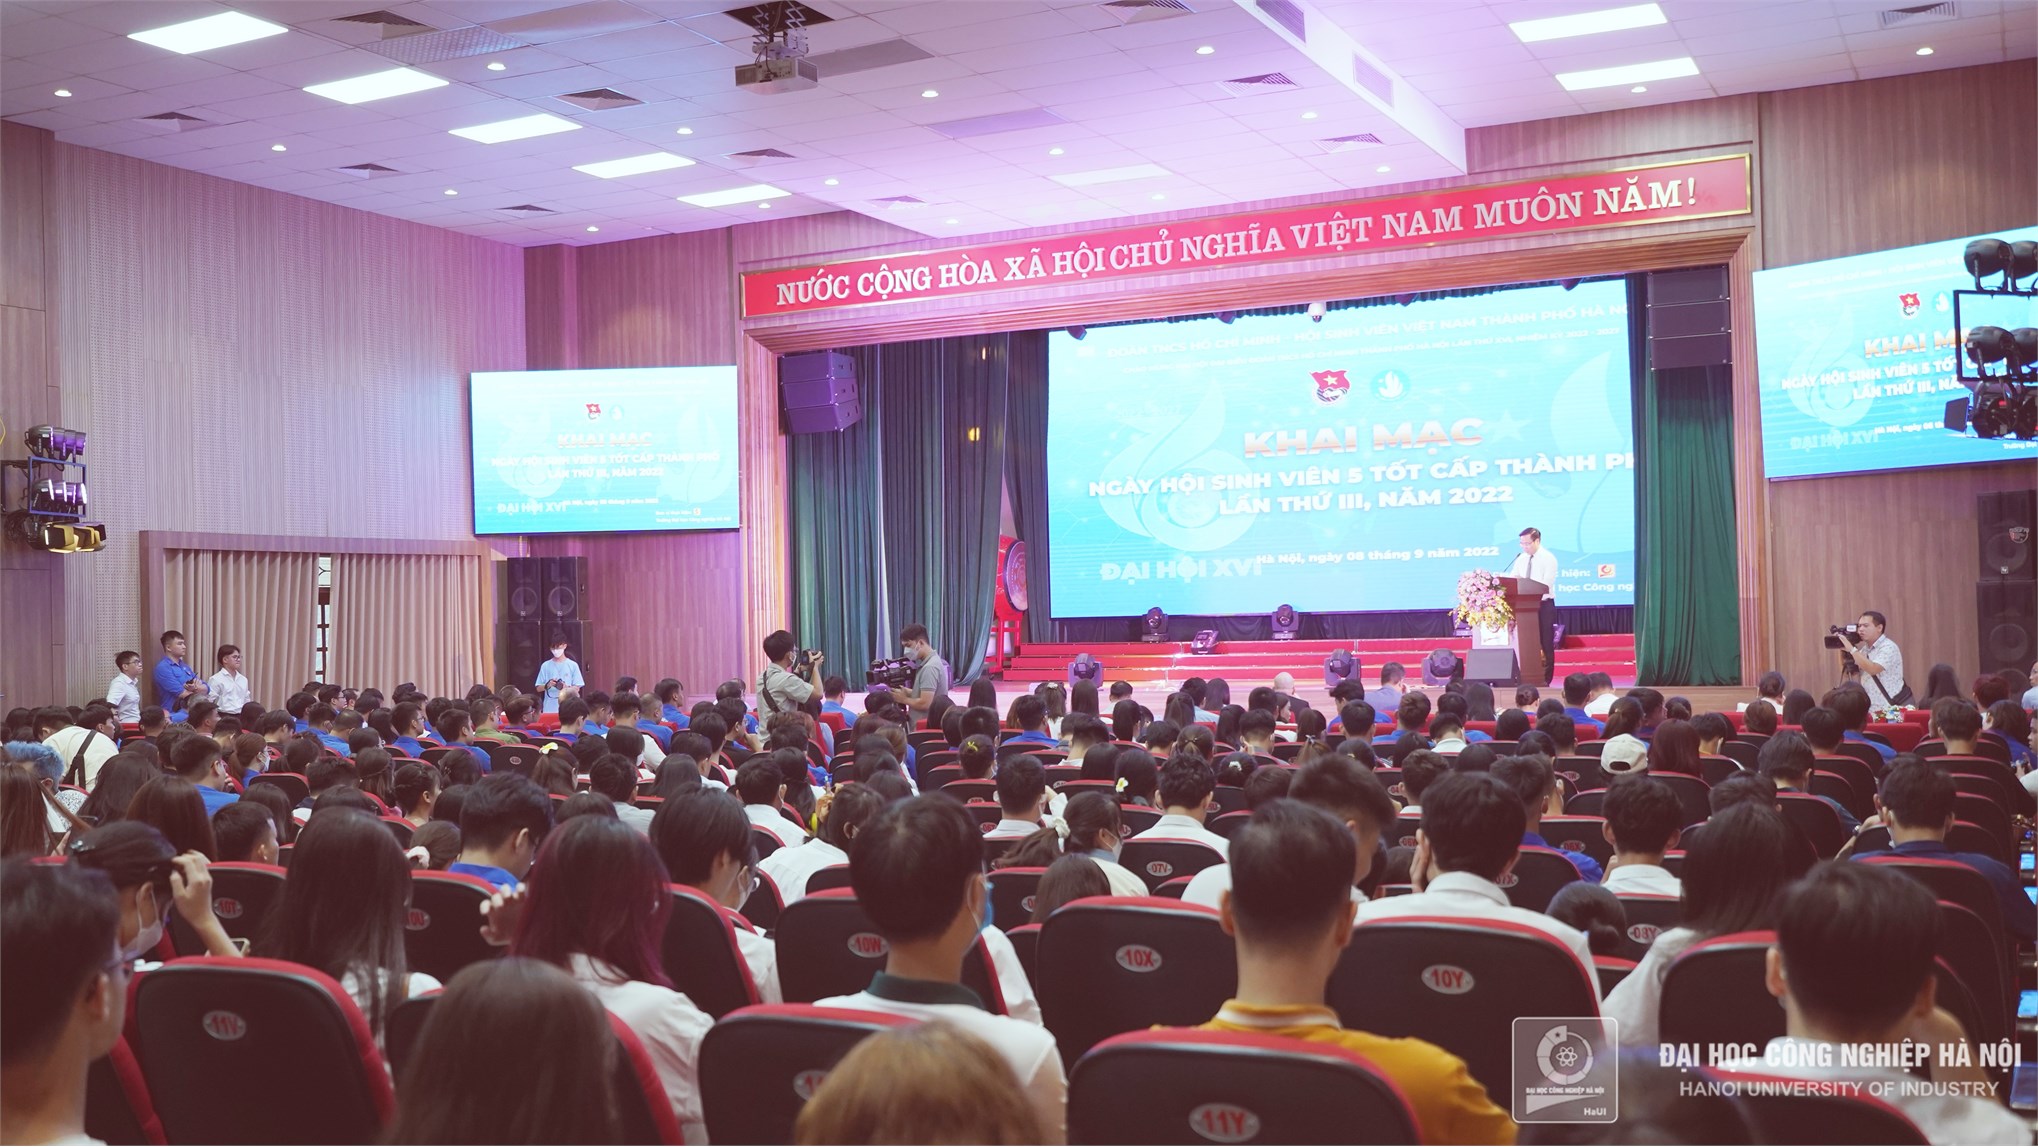 The third festival of “Students of Five Merits” at City-level in 2022 was organized at Hanoi University of Industry